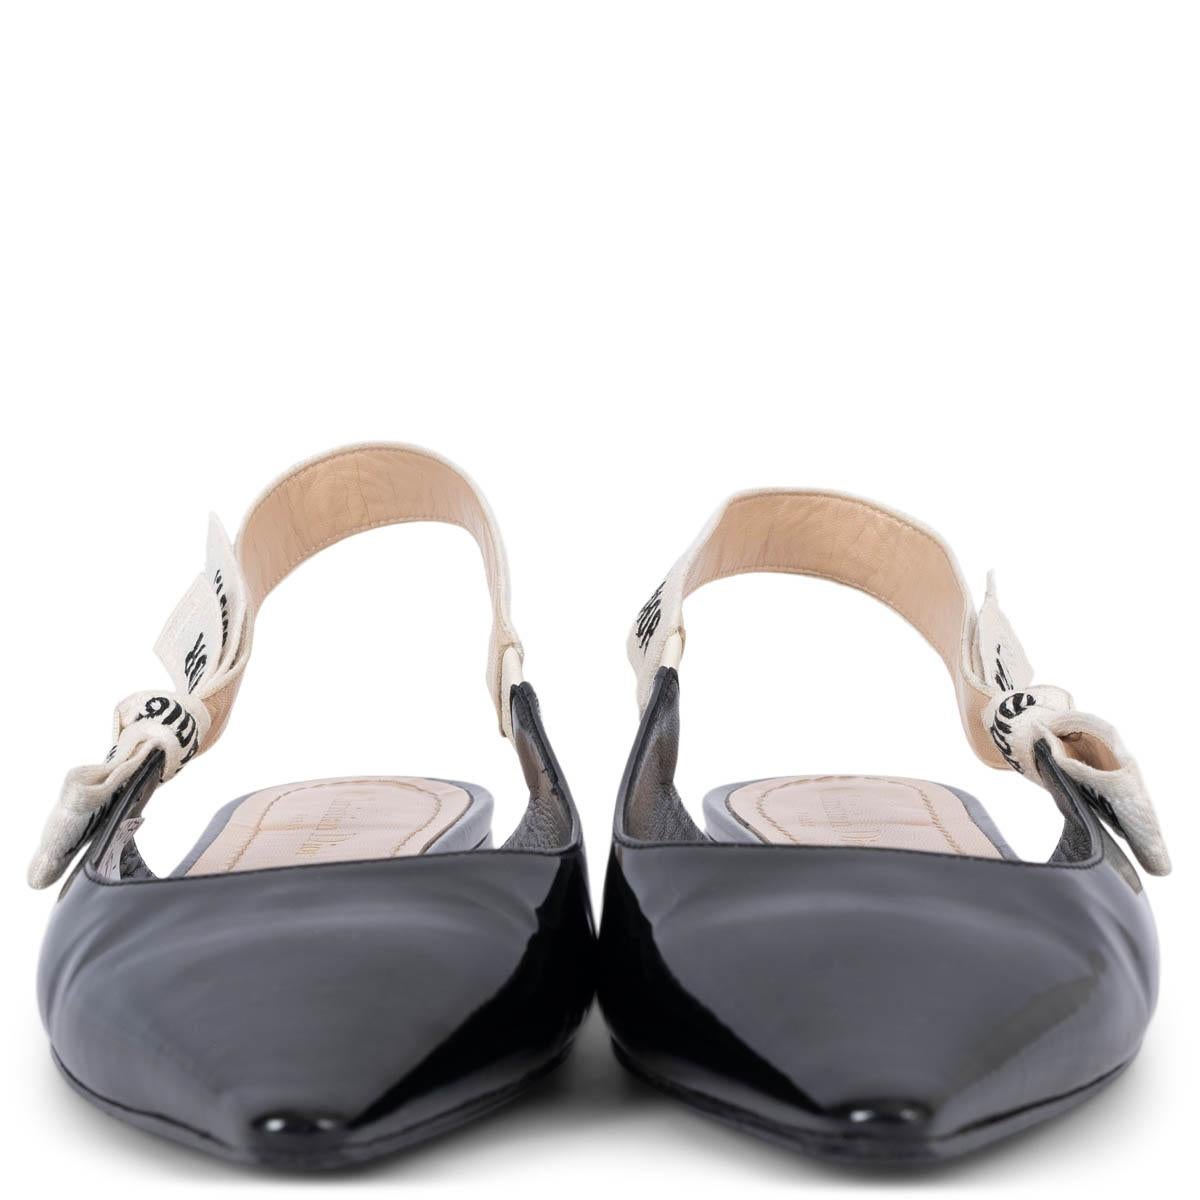 100% authentic Christian Dior J'Adior slingback flats in black patent leather with classic J'Adior canvas ribbon. Have been worn and are in excellent condition. Black rubber sole has been added. 

Measurements
Model	KCB384VNRS900
Imprinted